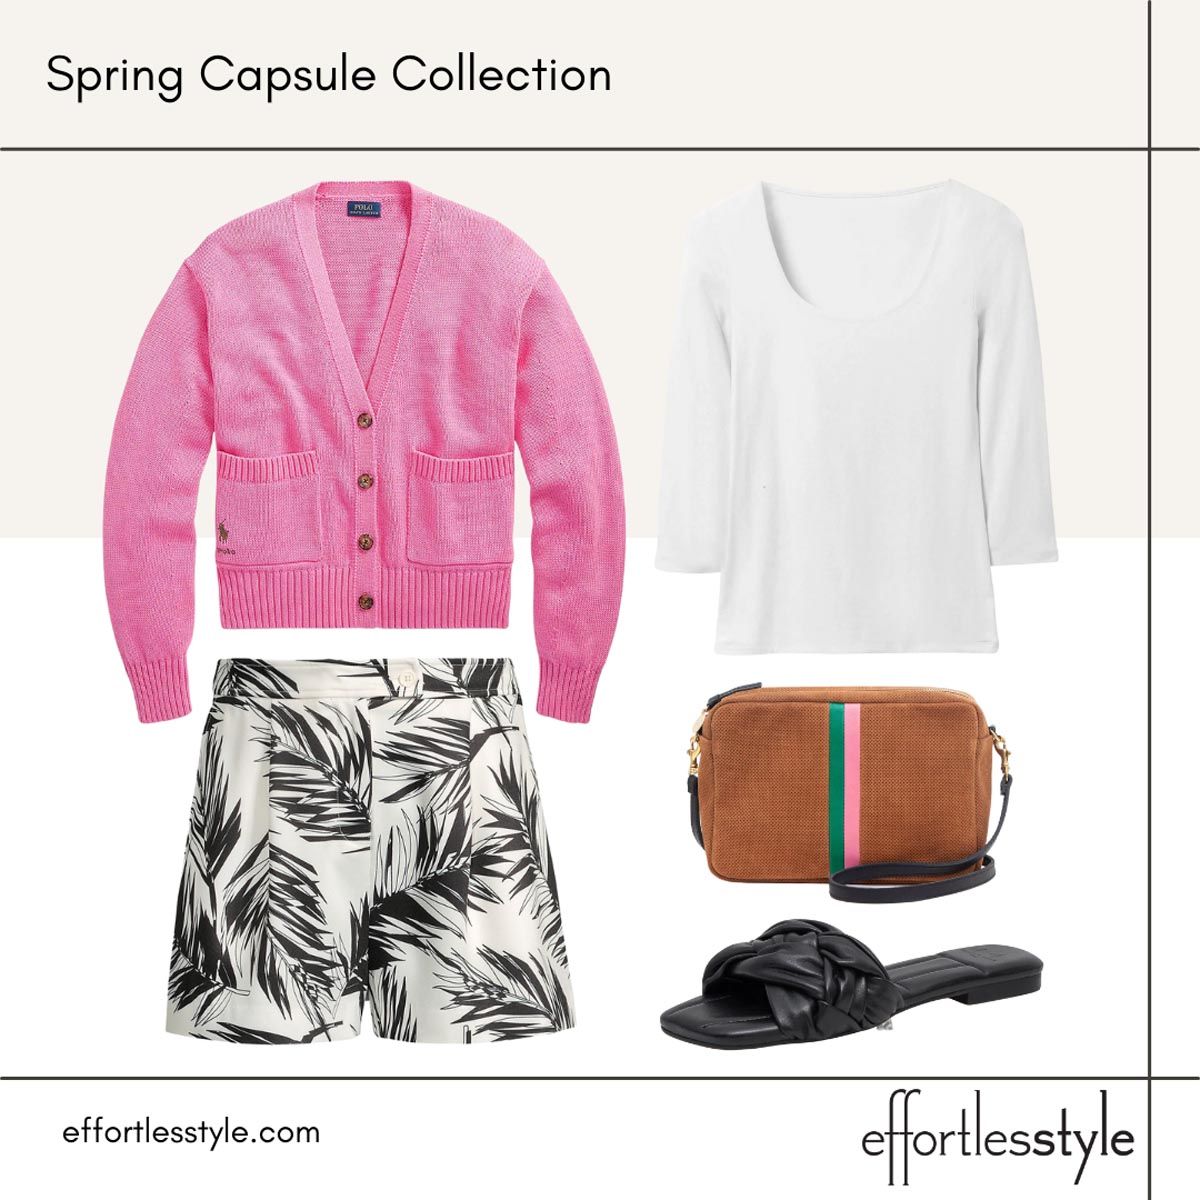 how to style shorts in the spring how to wear shorts for spring how to add a pop of color to black and white look